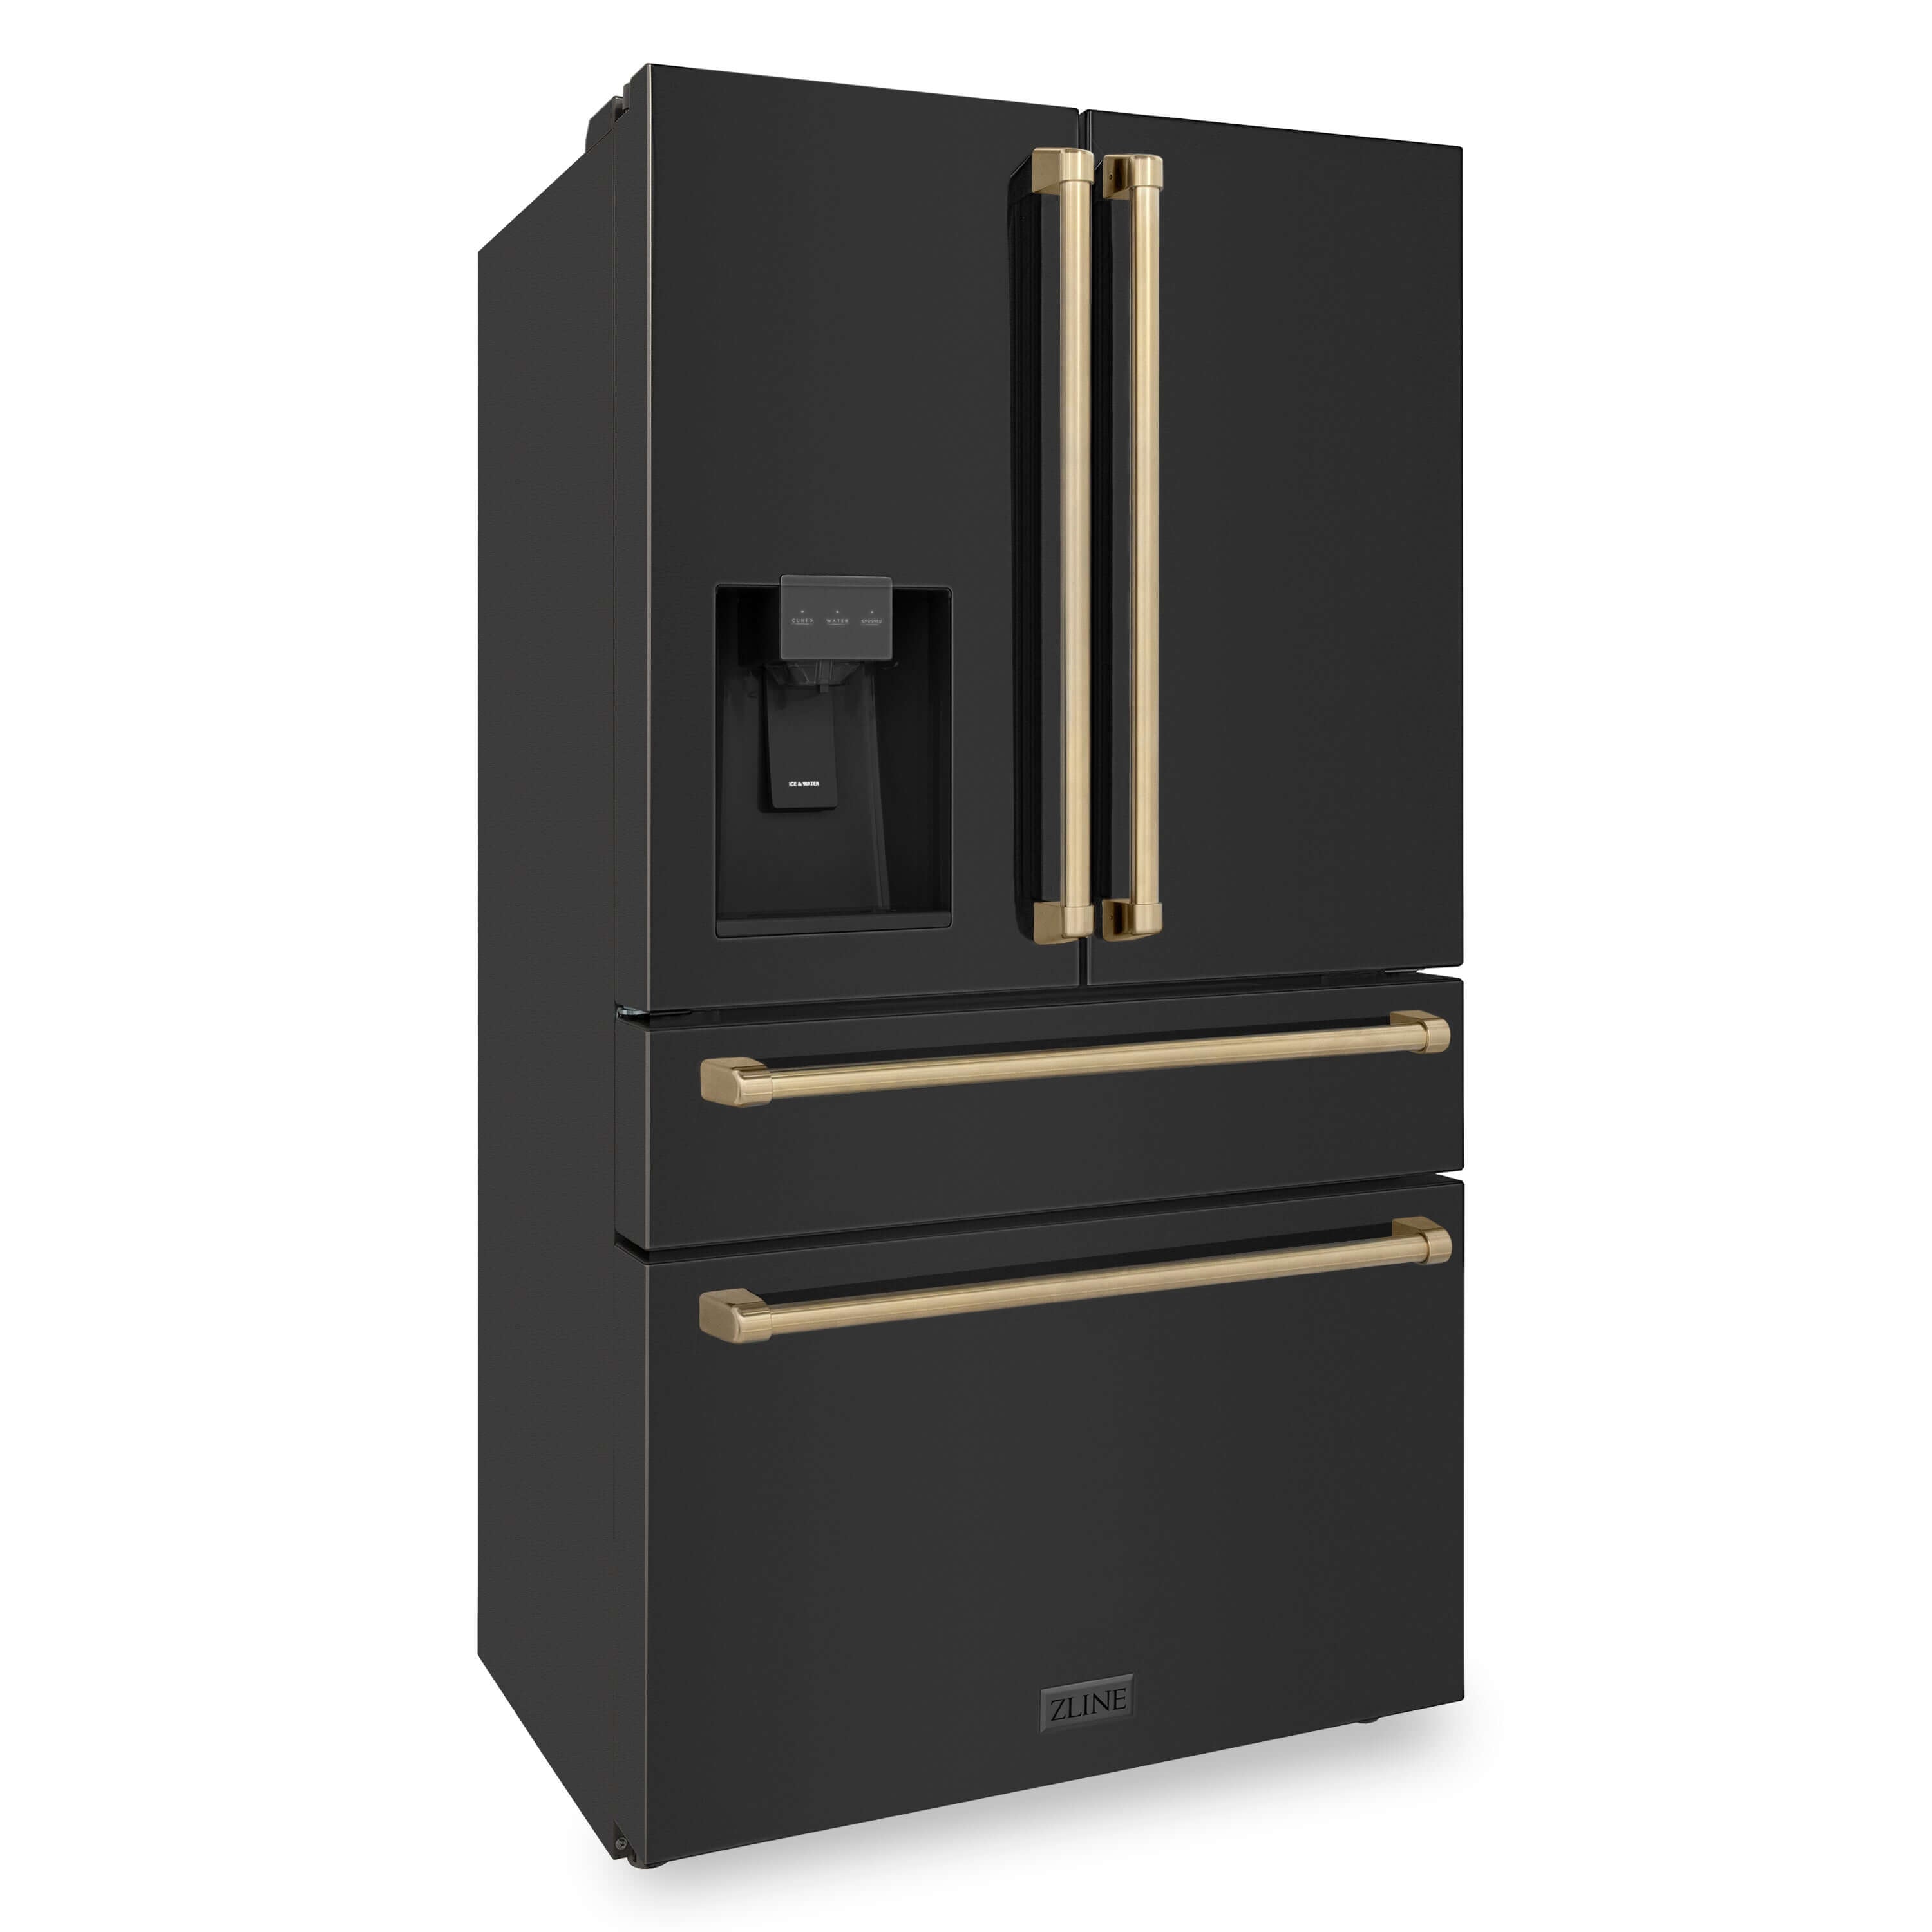 ZLINE 36 in. Autograph Edition French Door Refrigerator in Black Stainless Steel with Champagne Bronze Accents (RFMZ-W-36-BS-CB) Side View.